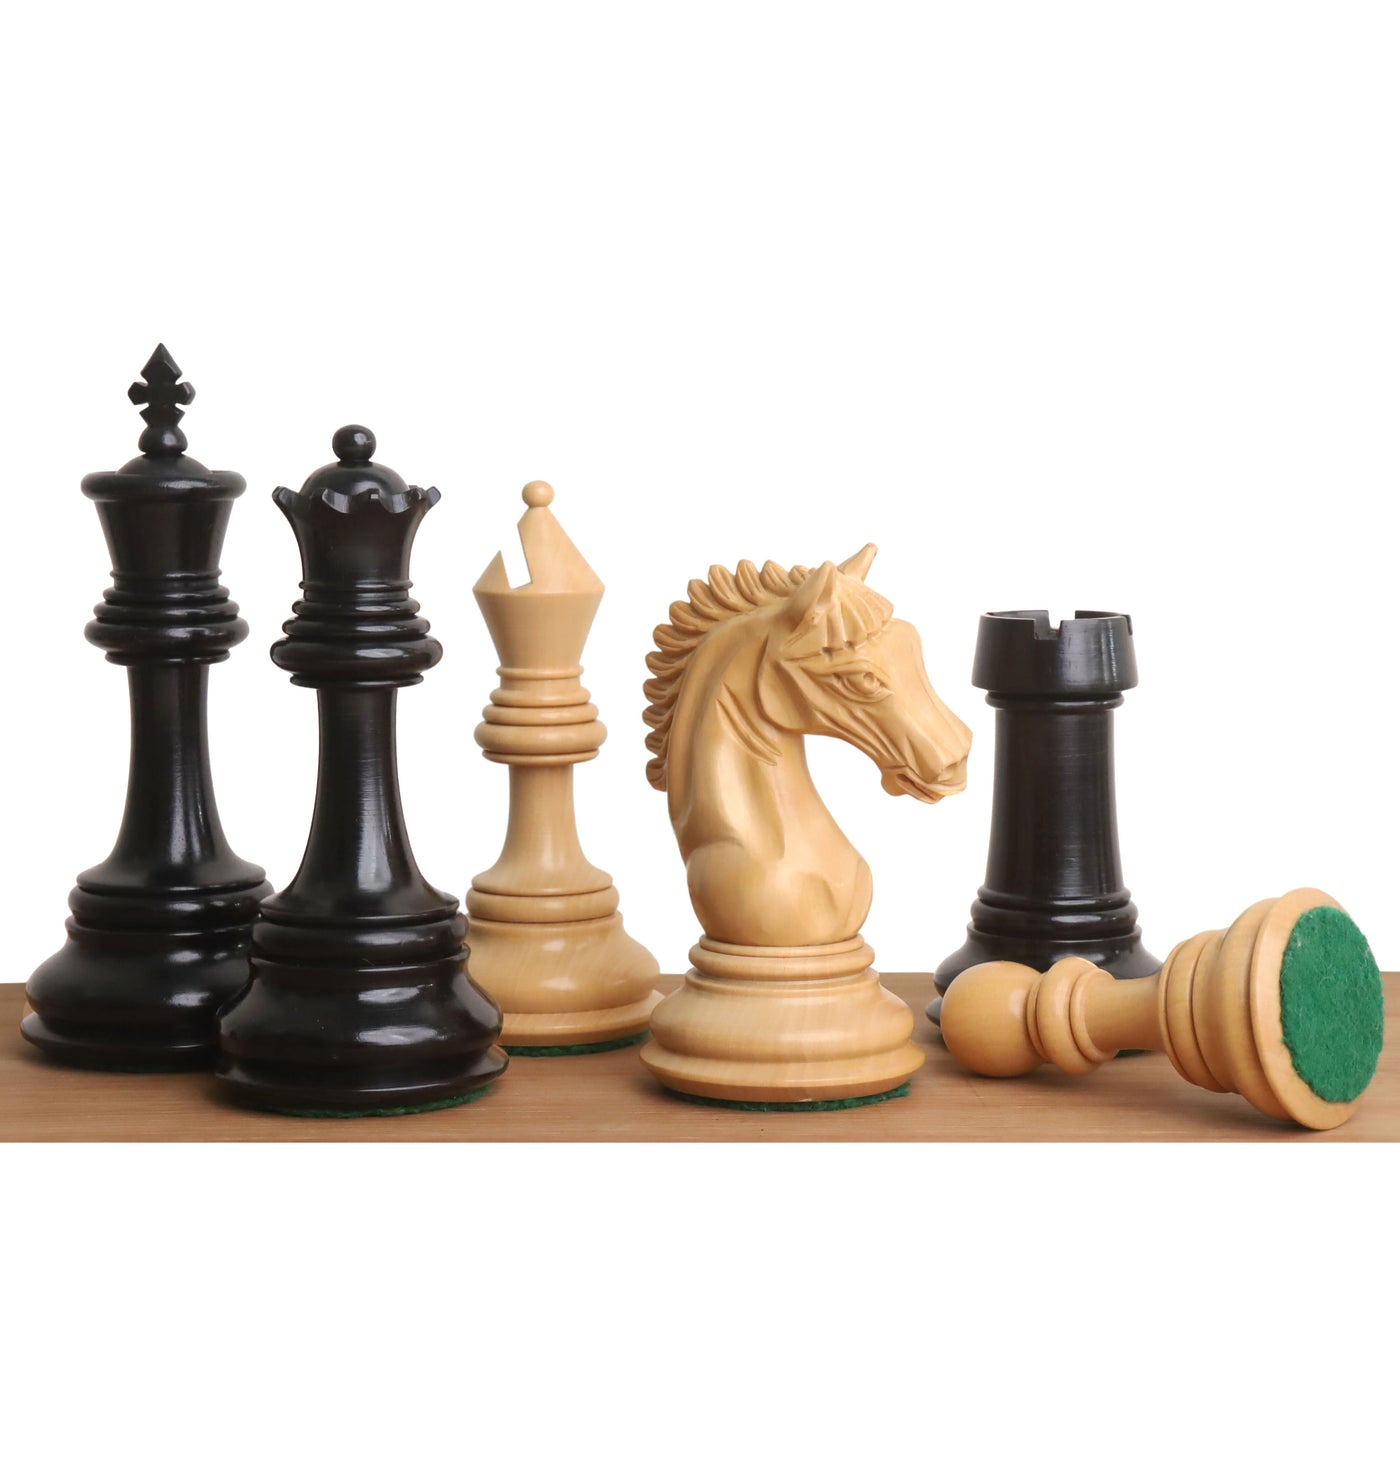 4.5" Tilted Knight Luxury Staunton Chess Set - Chess Pieces Only - Ebony Wood & Boxwood